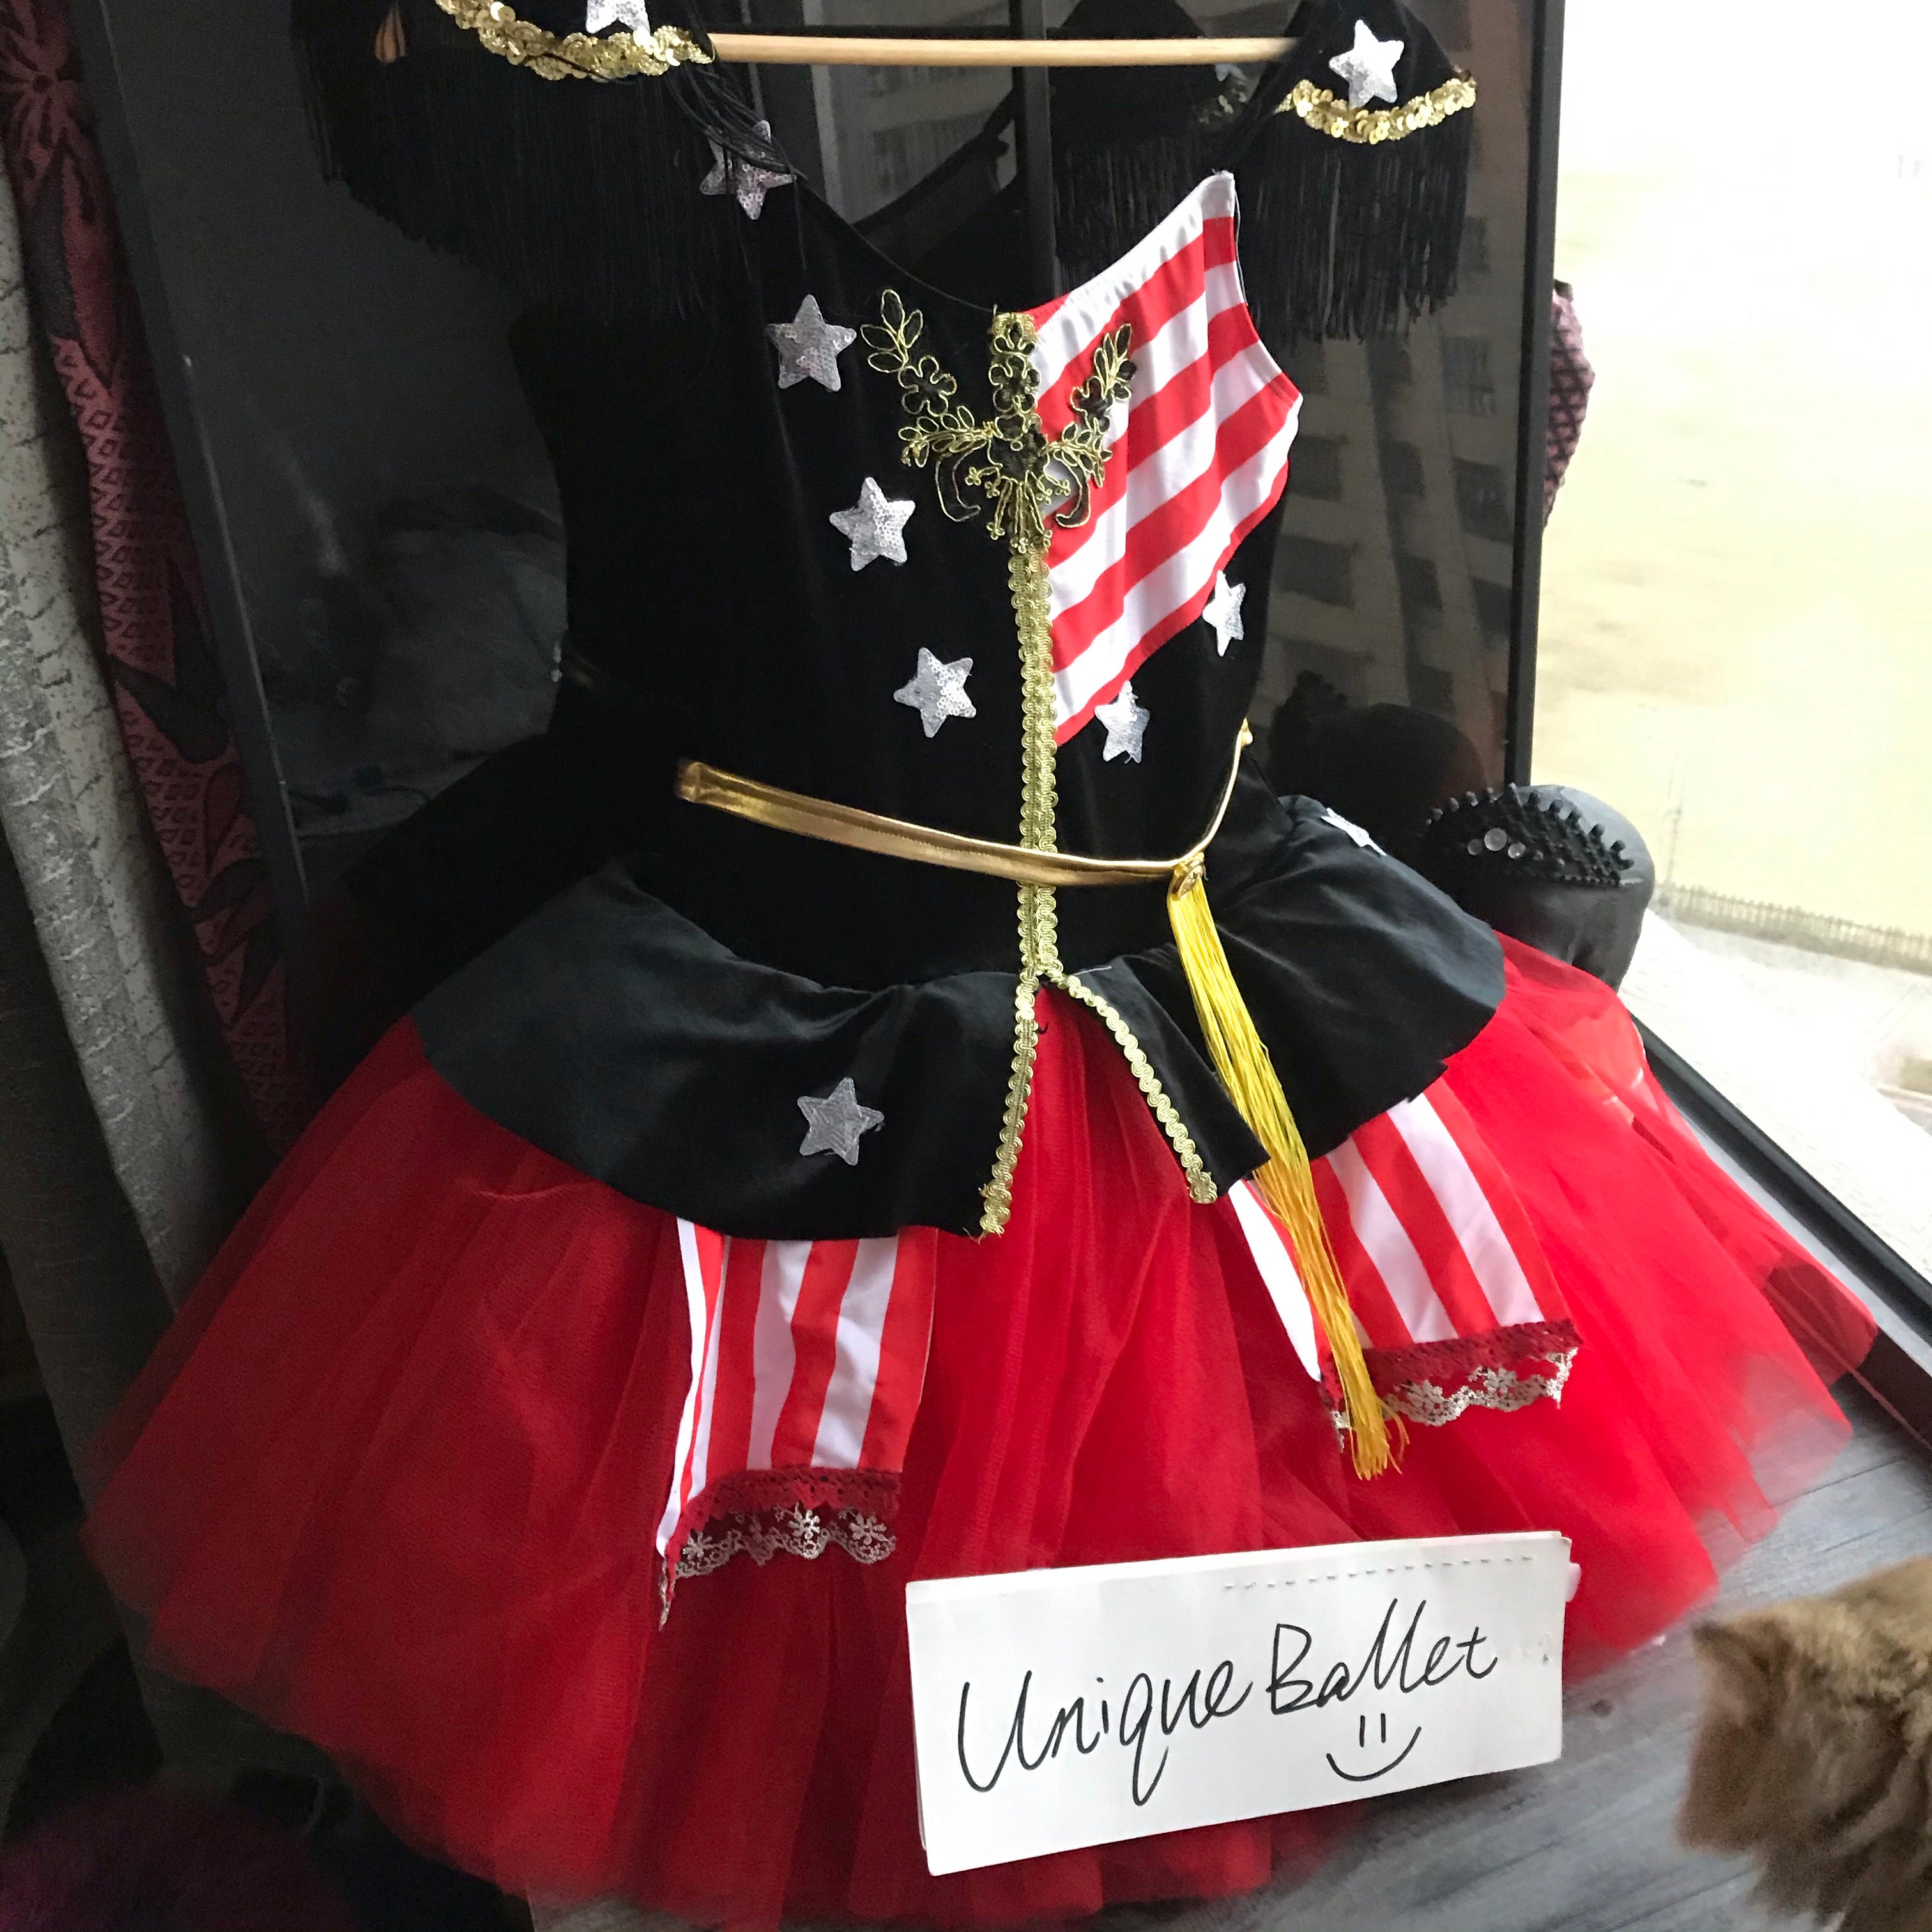 Pullover Red Stars and Strips Ballet Bell TuTu Costume Stage Dress Dance Wear-YL-RSTARSTRPRED